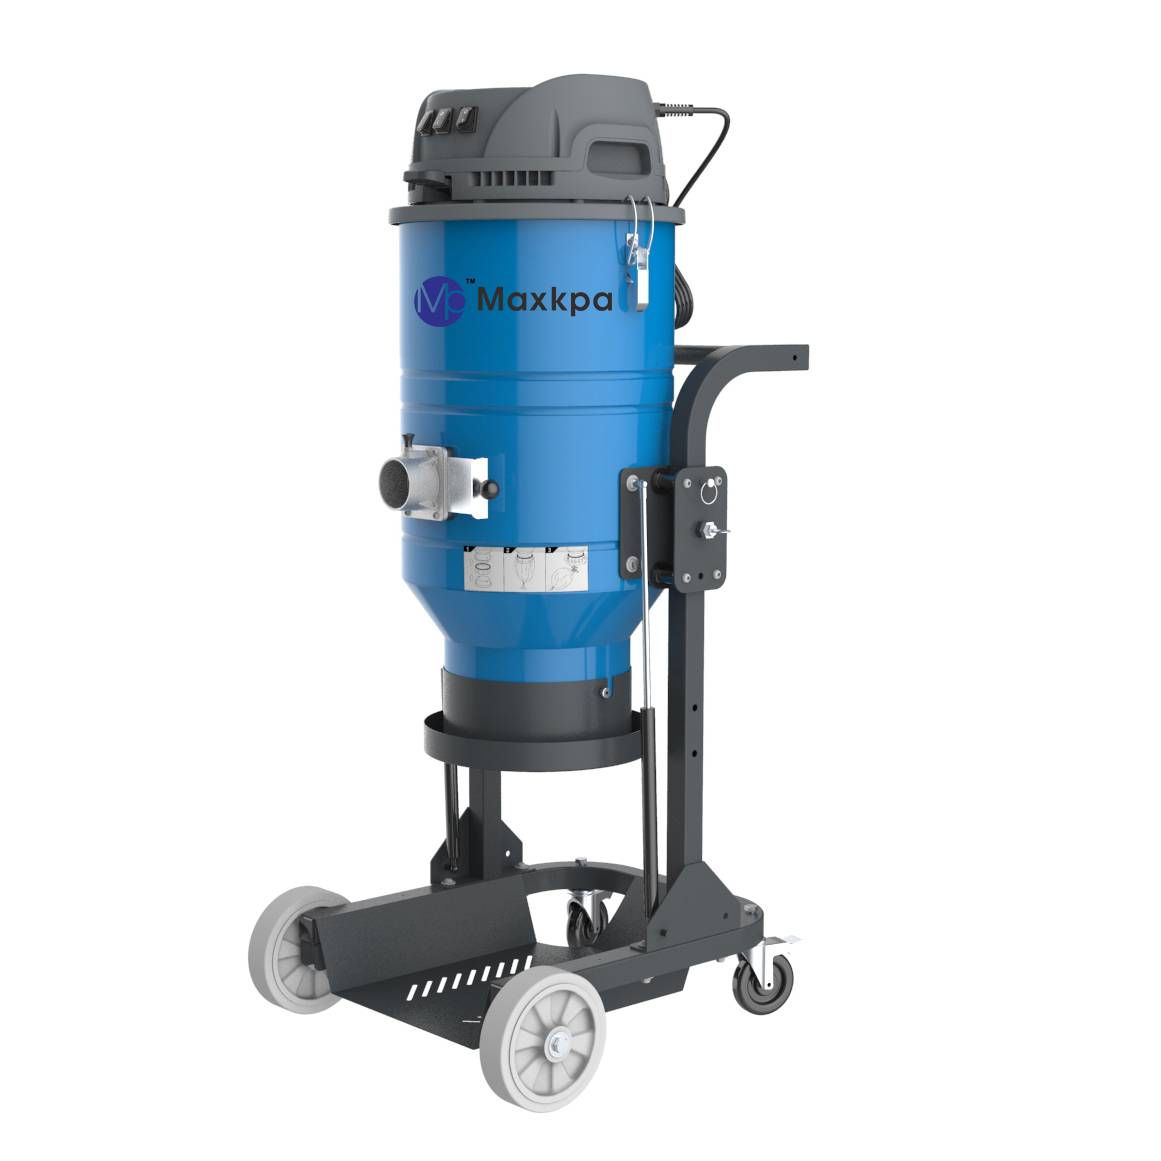 new TS1000 Single phase HEPA dust extractor Featured Image